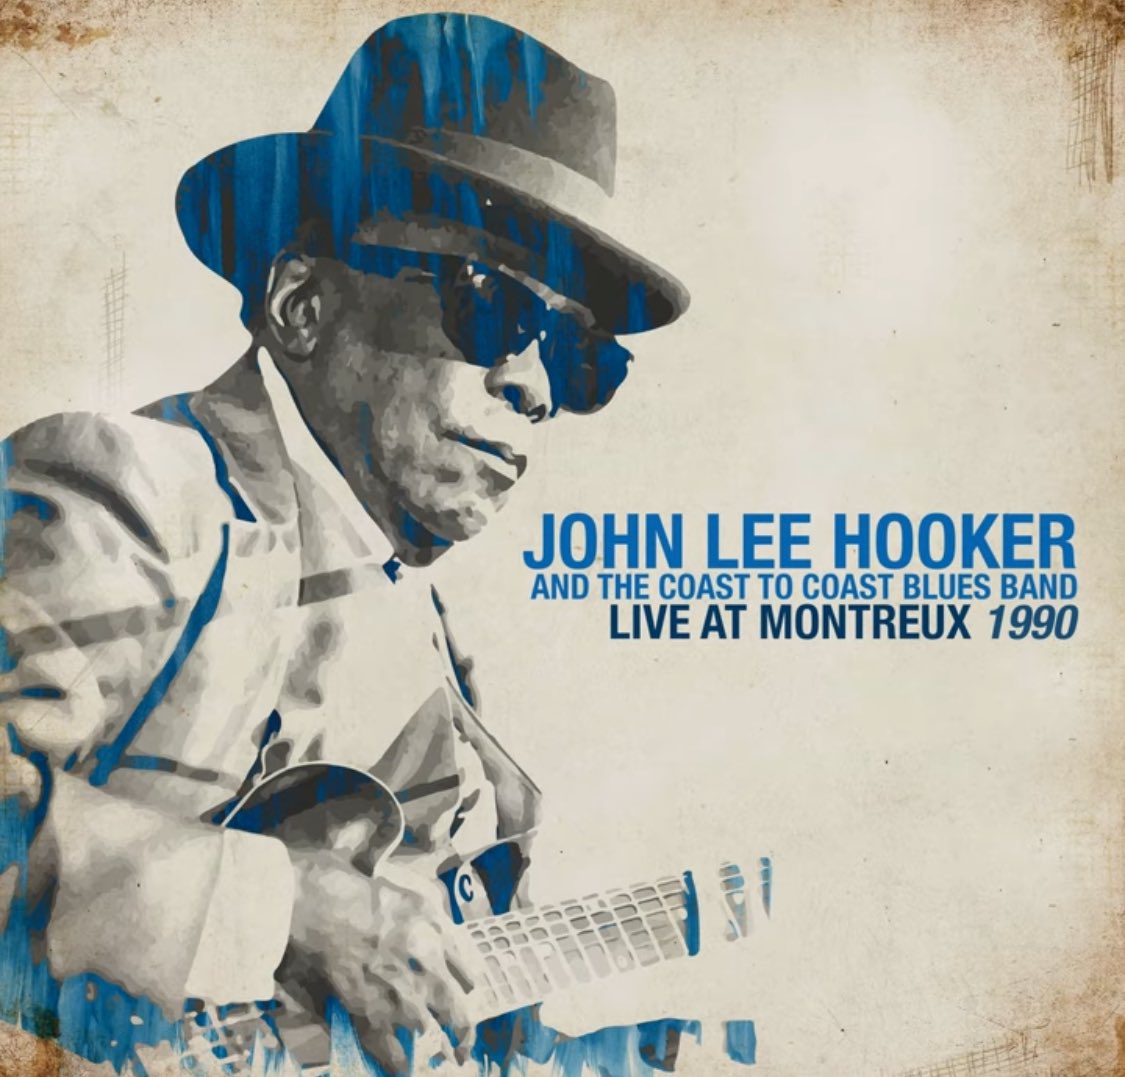 Baby Lee (Live) youtu.be/al35QUo124M?si… @YouTube
John Lee Hooker 1990 Live at Montreux